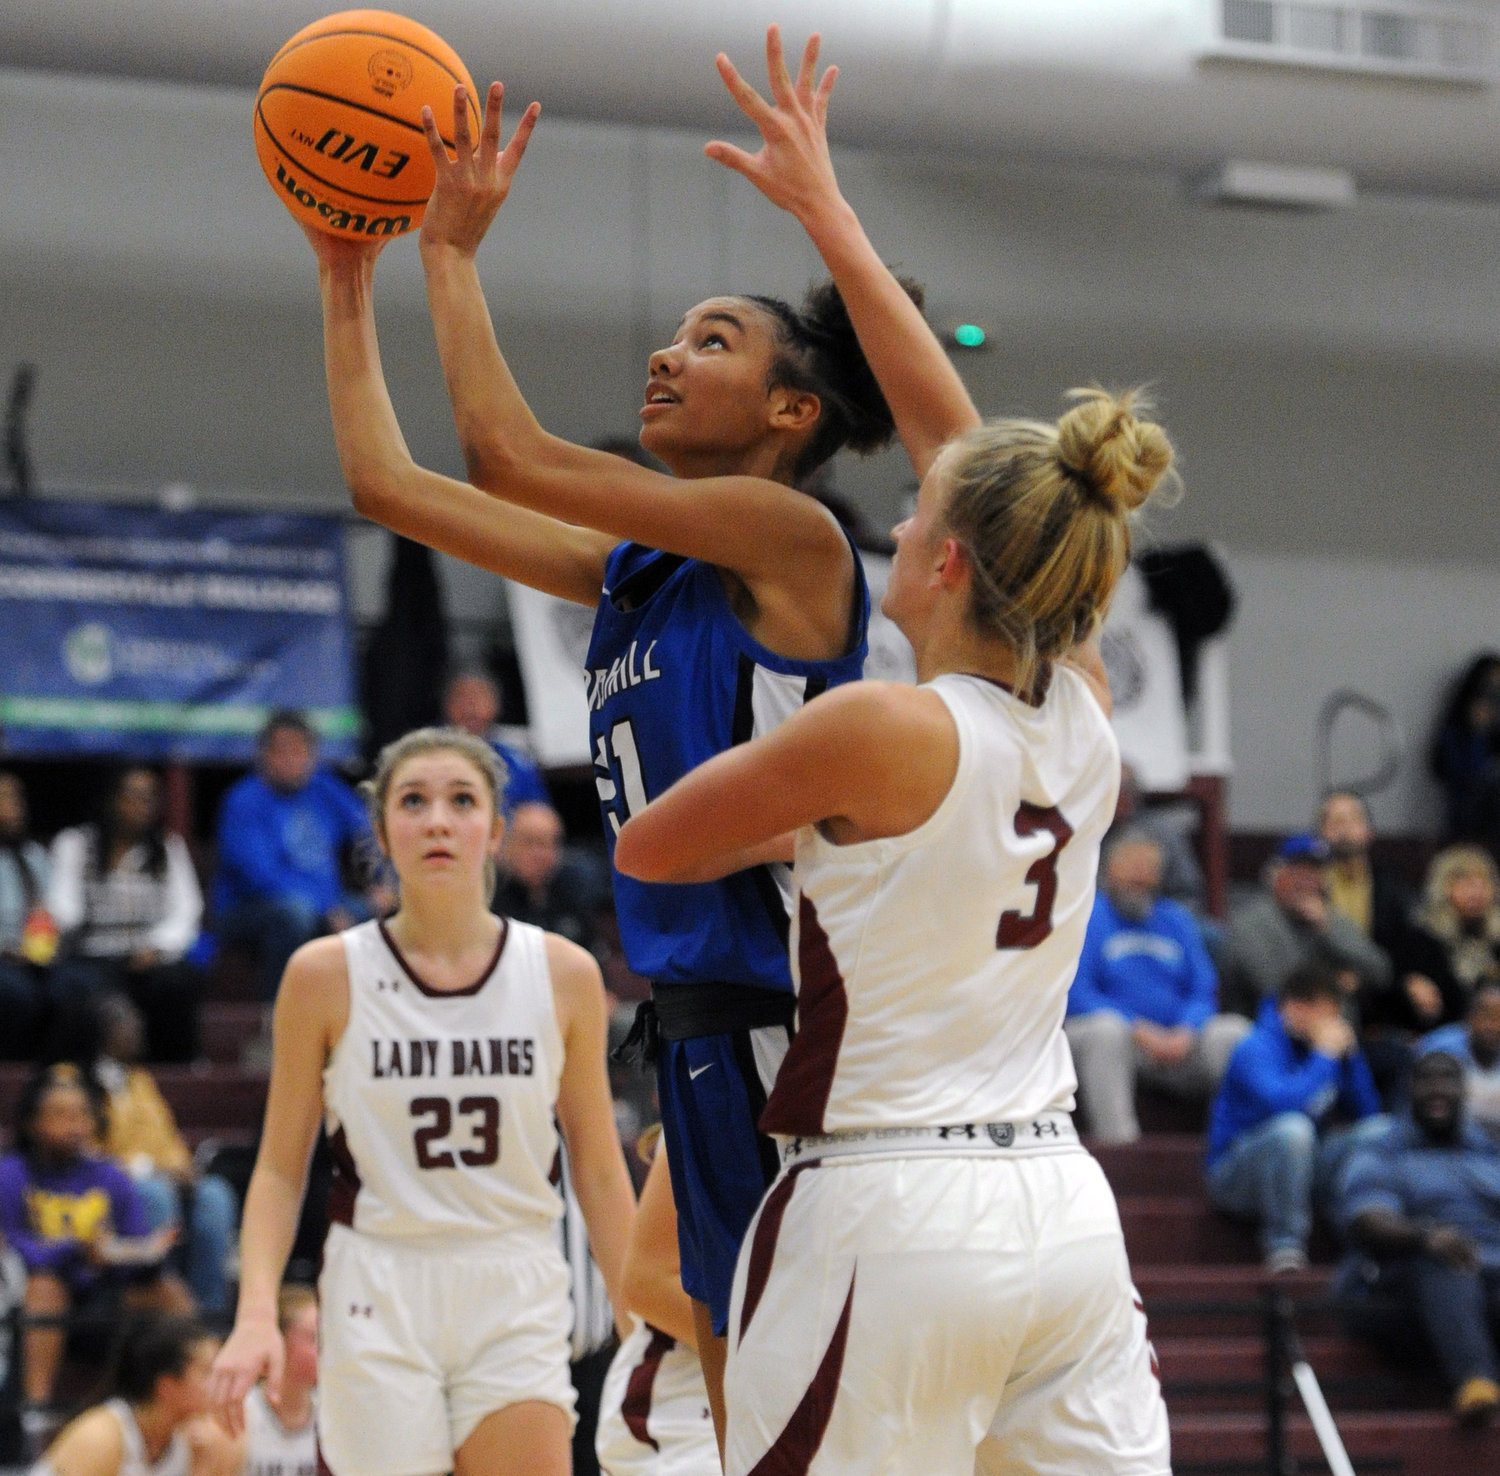 Mashawna Ridley draws heavy contact as she fights her way to the rim.